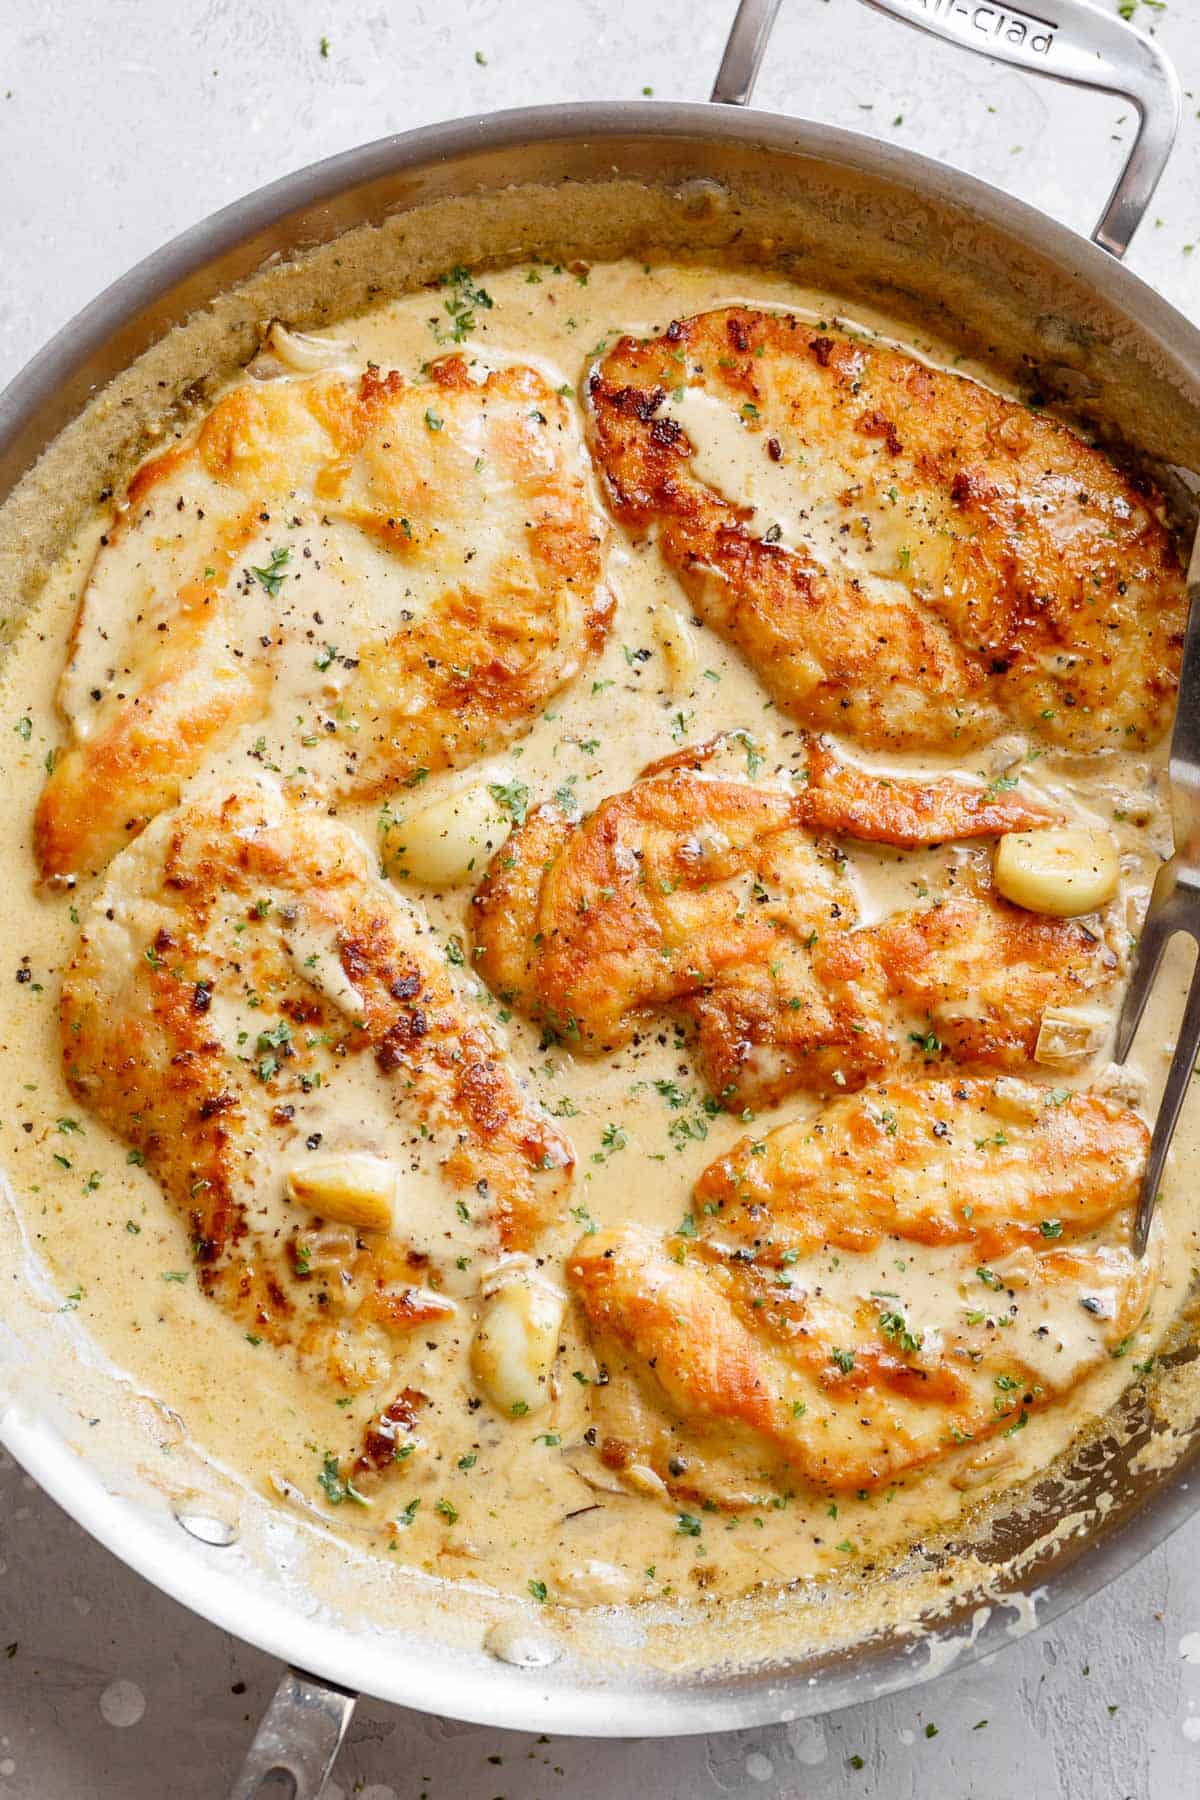 A silver frying pan of deliciously five Chicken Breasts in a garlic cream sauce with whole garlic cloves and a silver serving fork | cafedelites.com